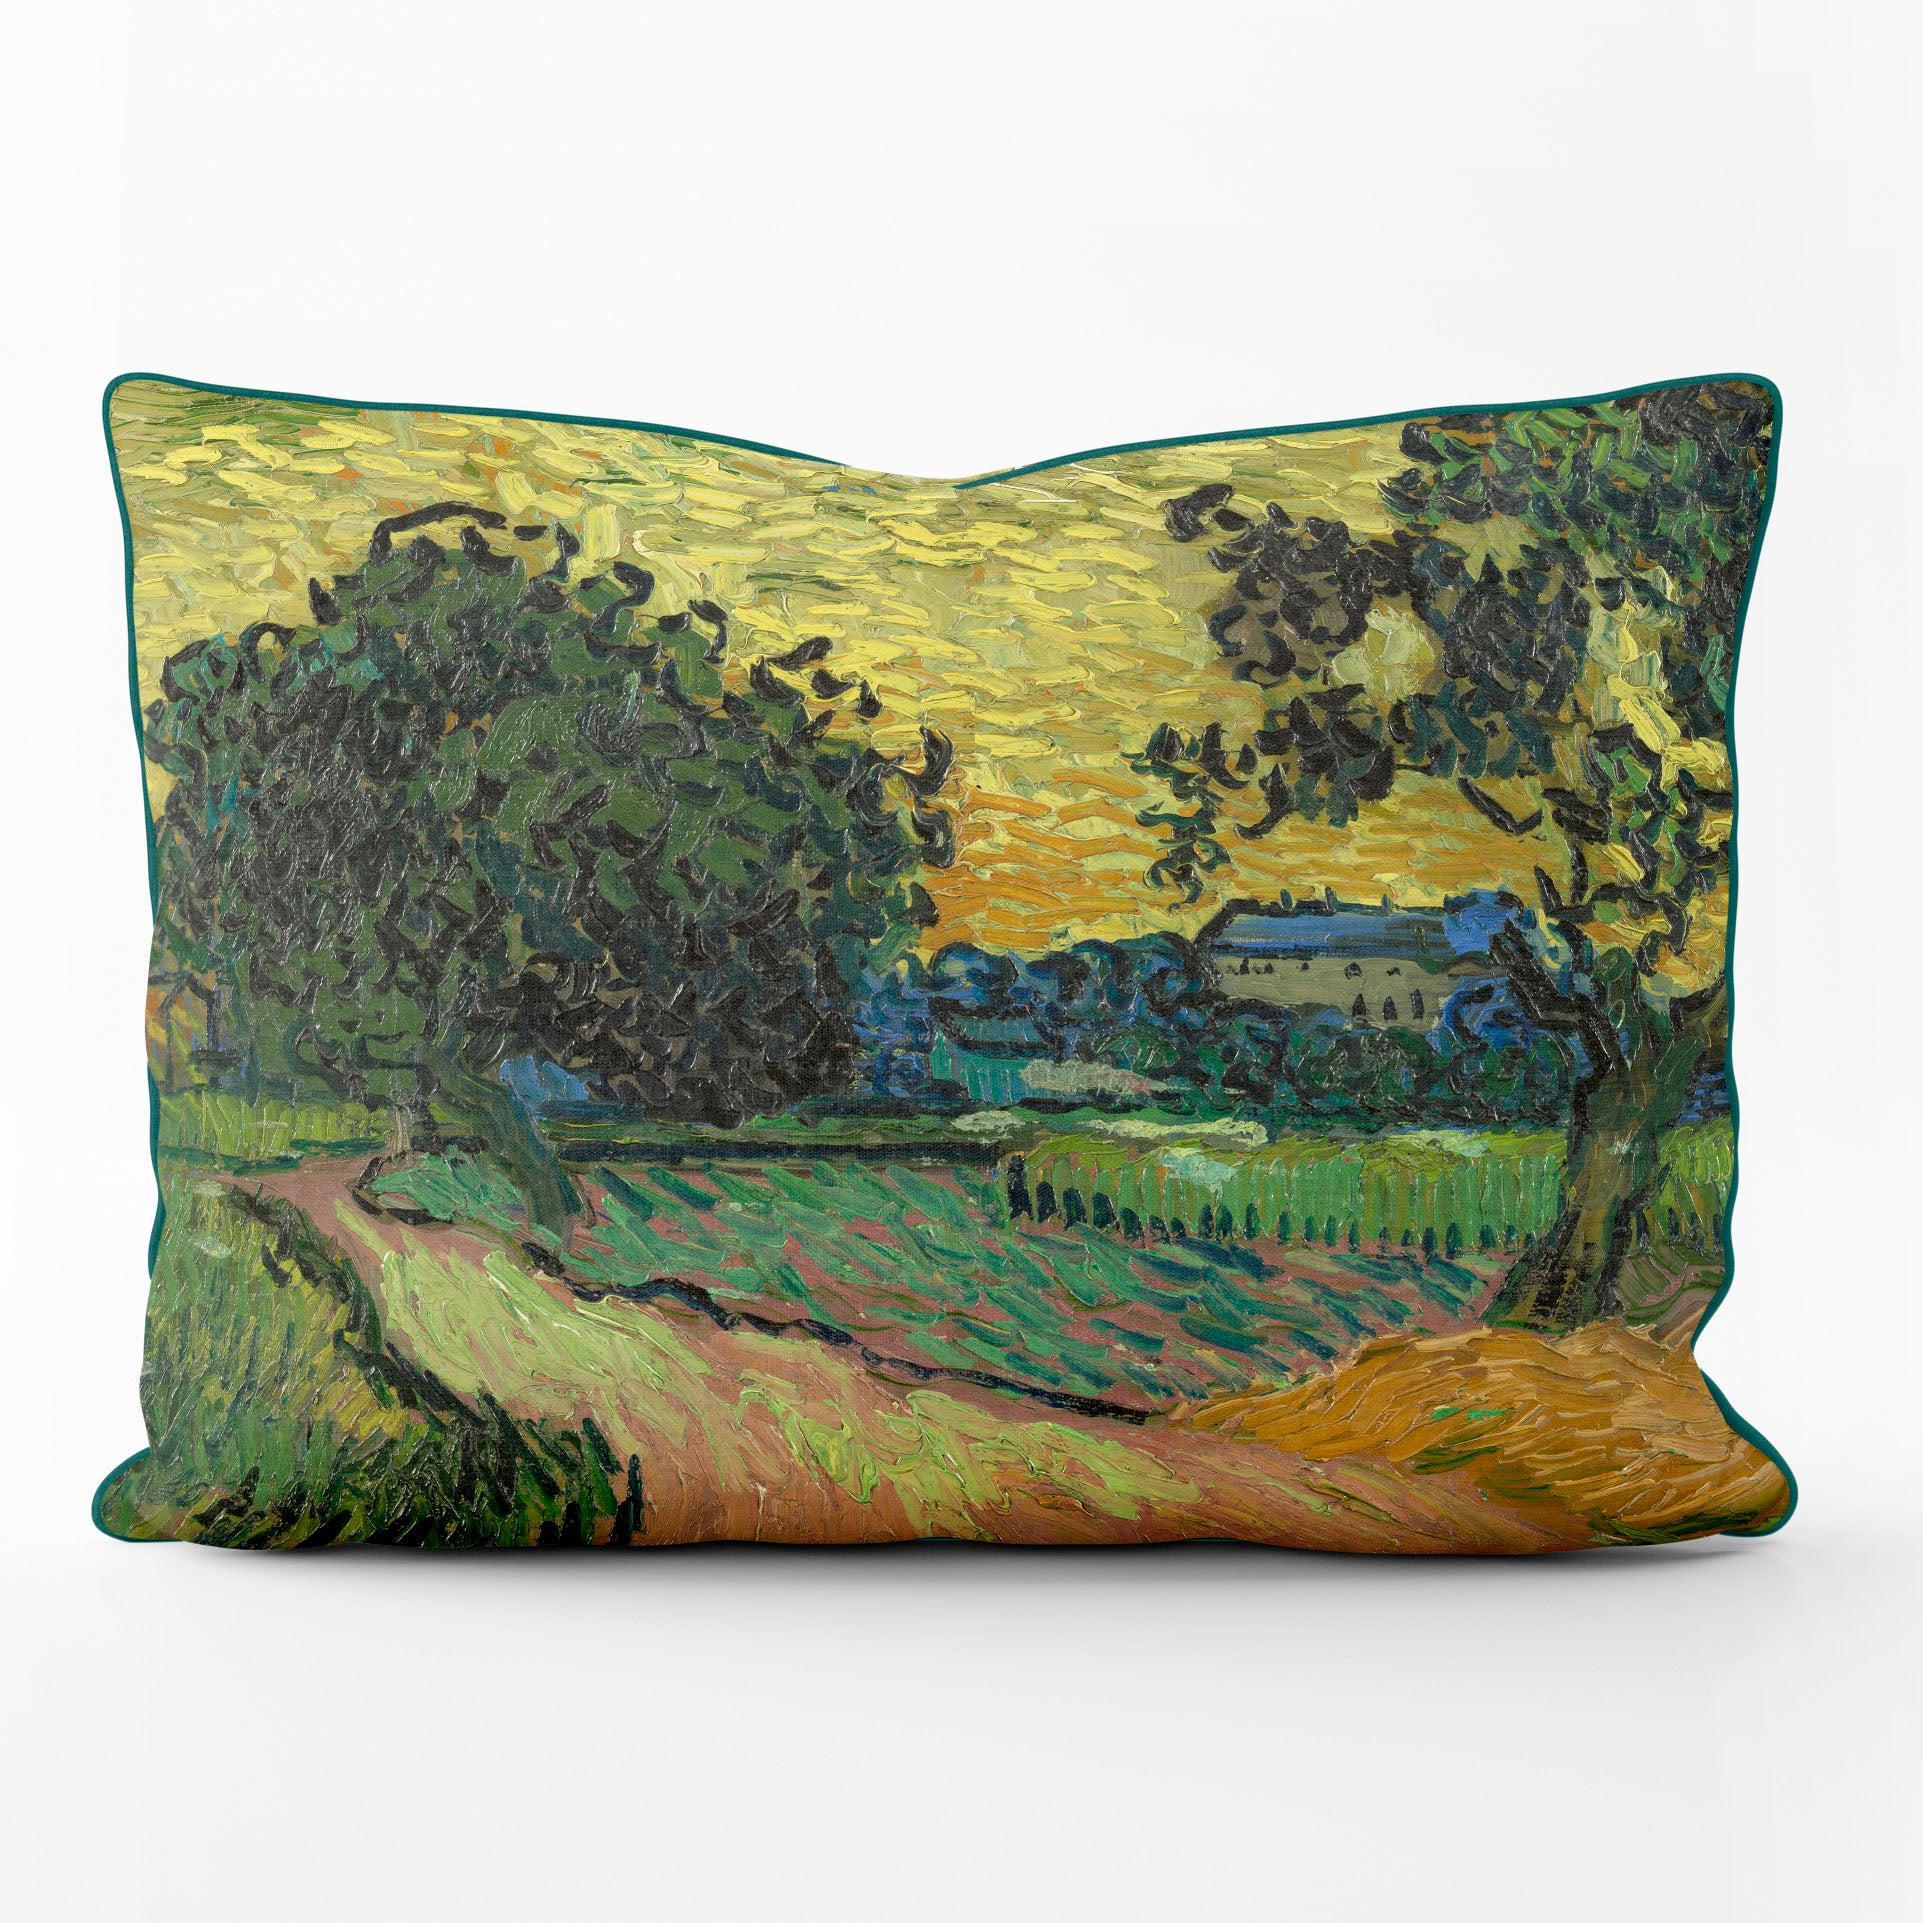 Landscapes At Twilight - Van Gogh Museum Outdoor Cushion